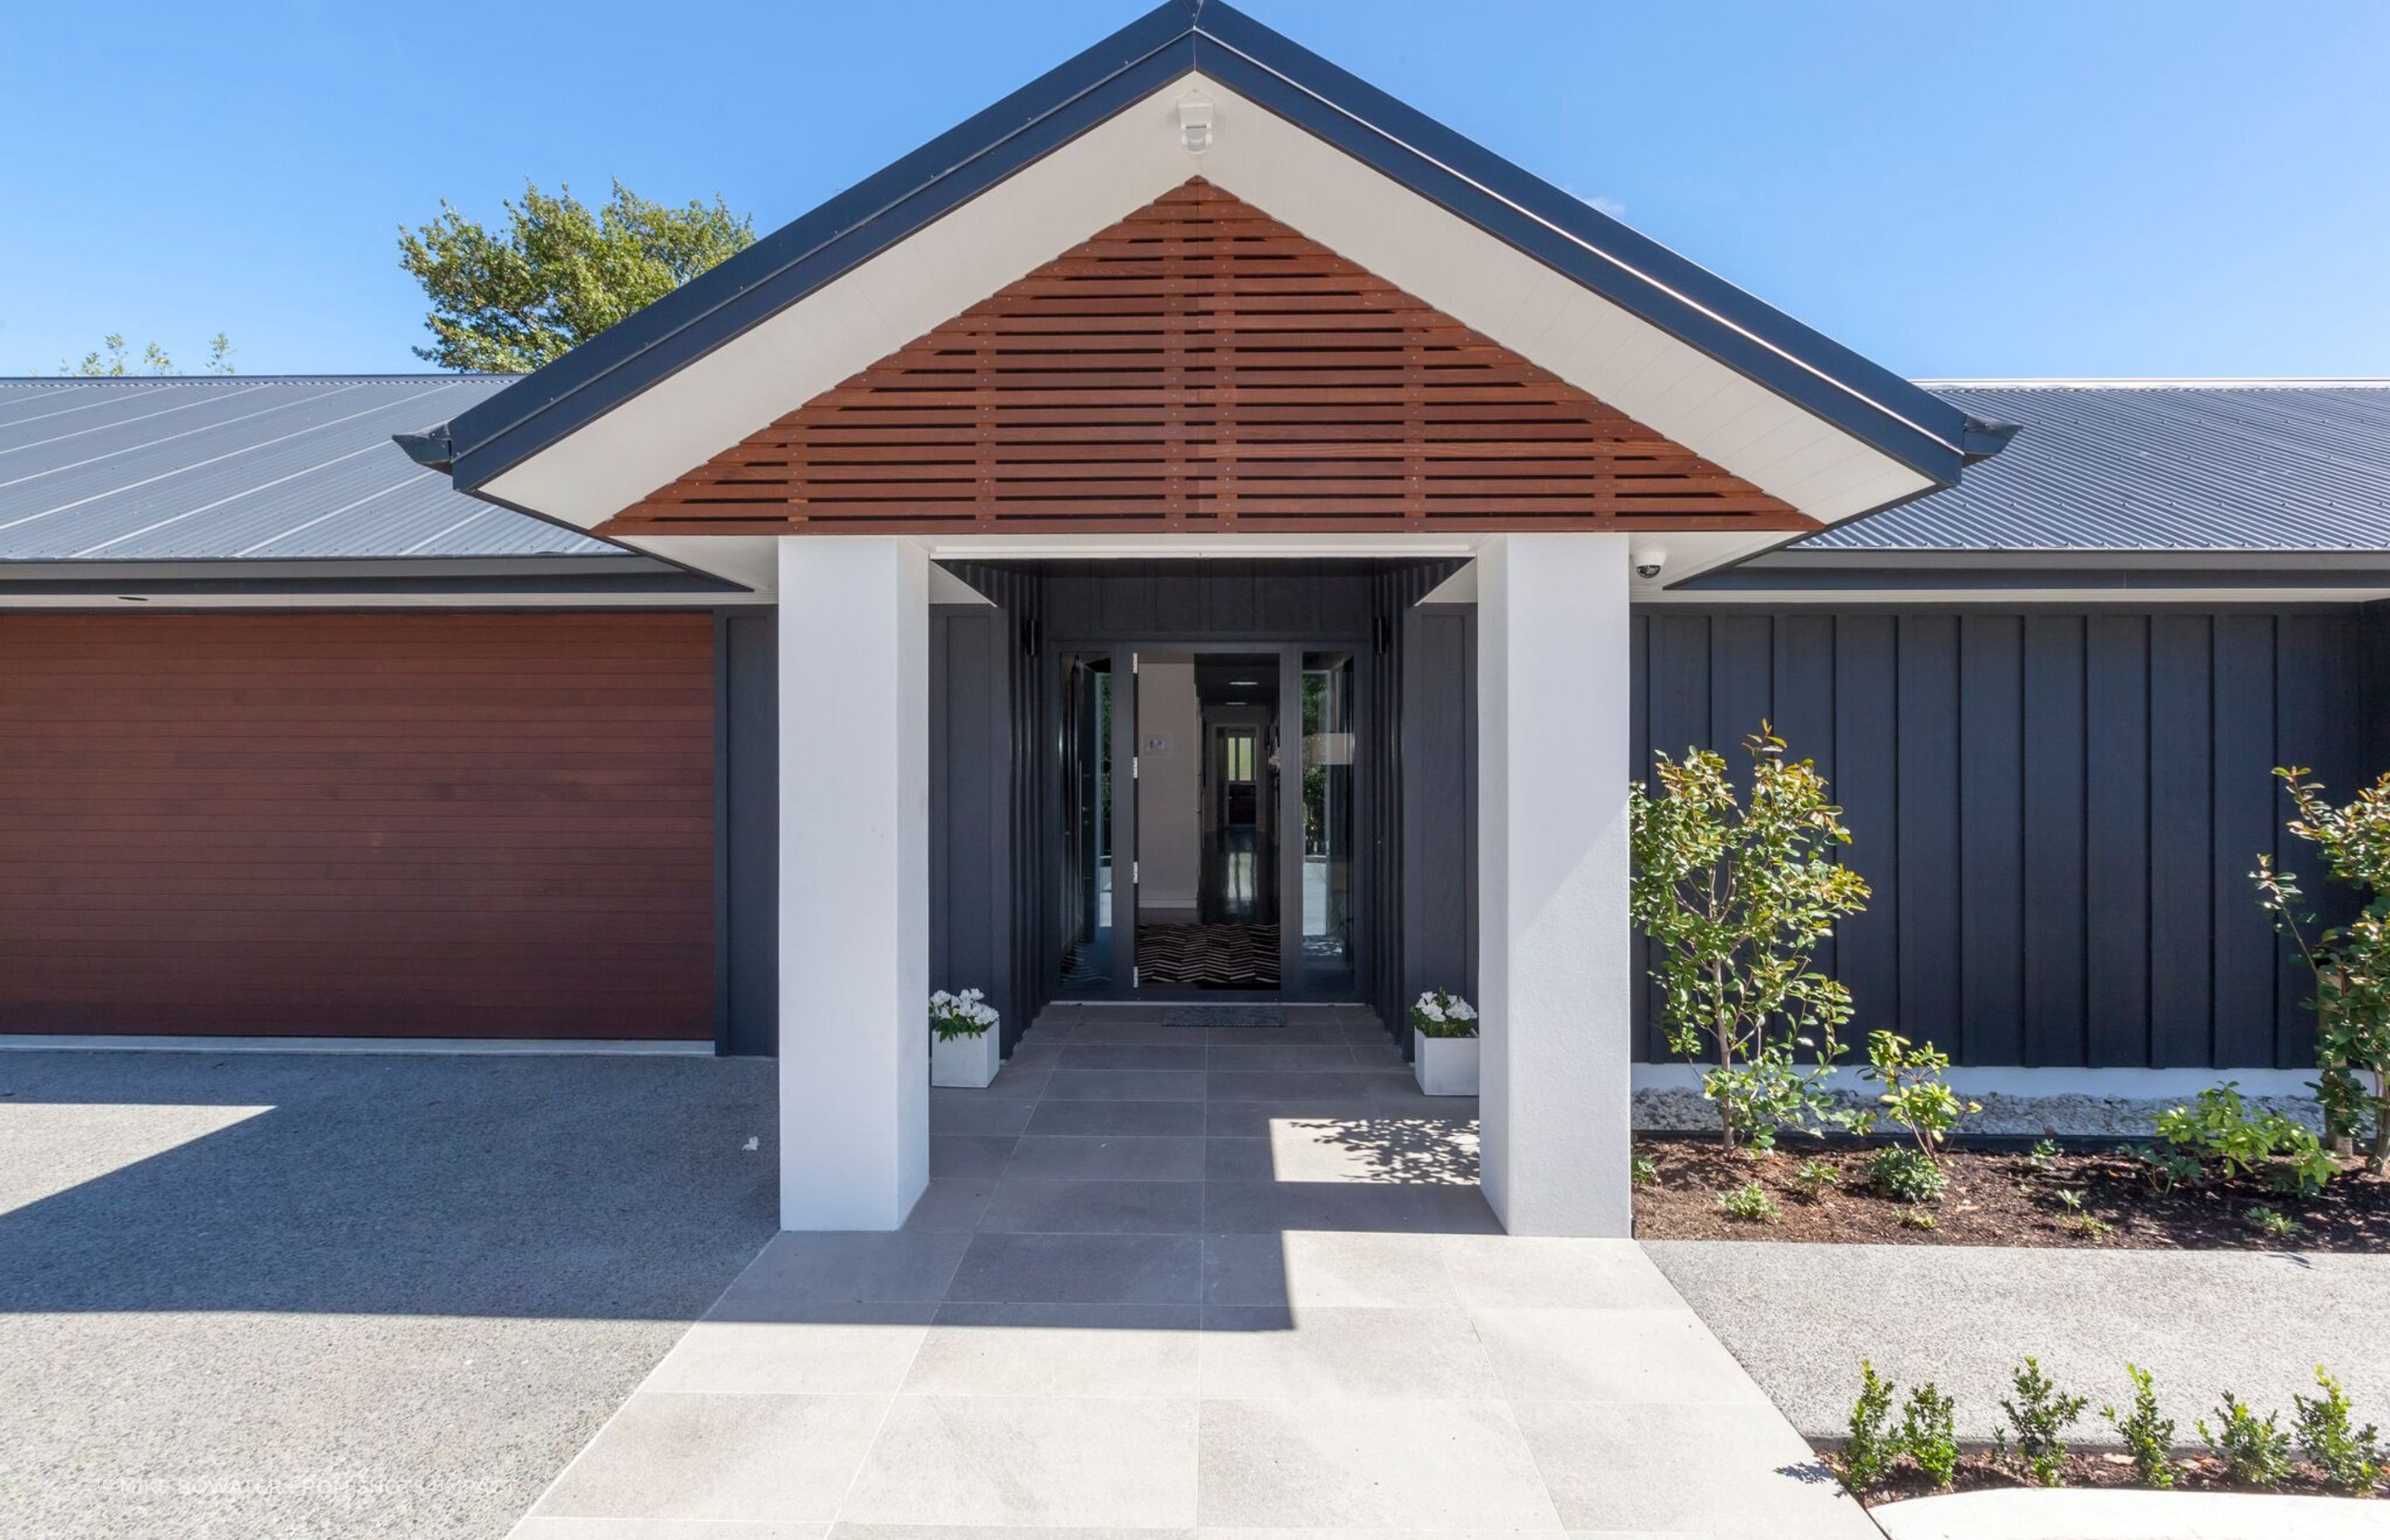 This beautiful lodge style home in Greytown, Waiararapa is designed by architect Alan Minty.